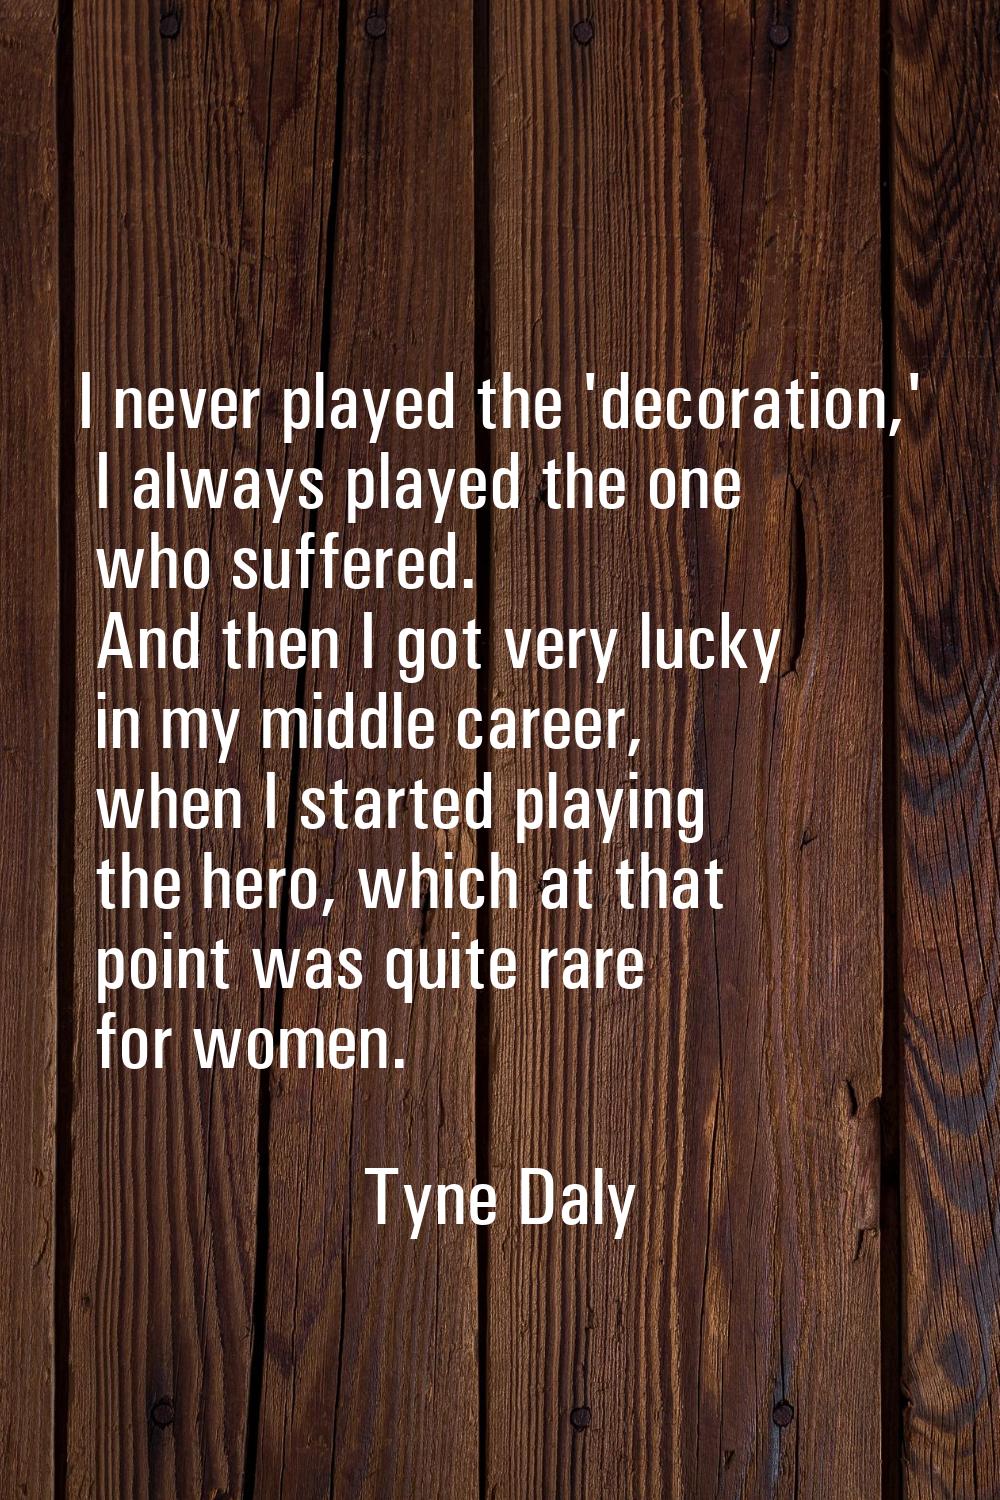 I never played the 'decoration,' I always played the one who suffered. And then I got very lucky in